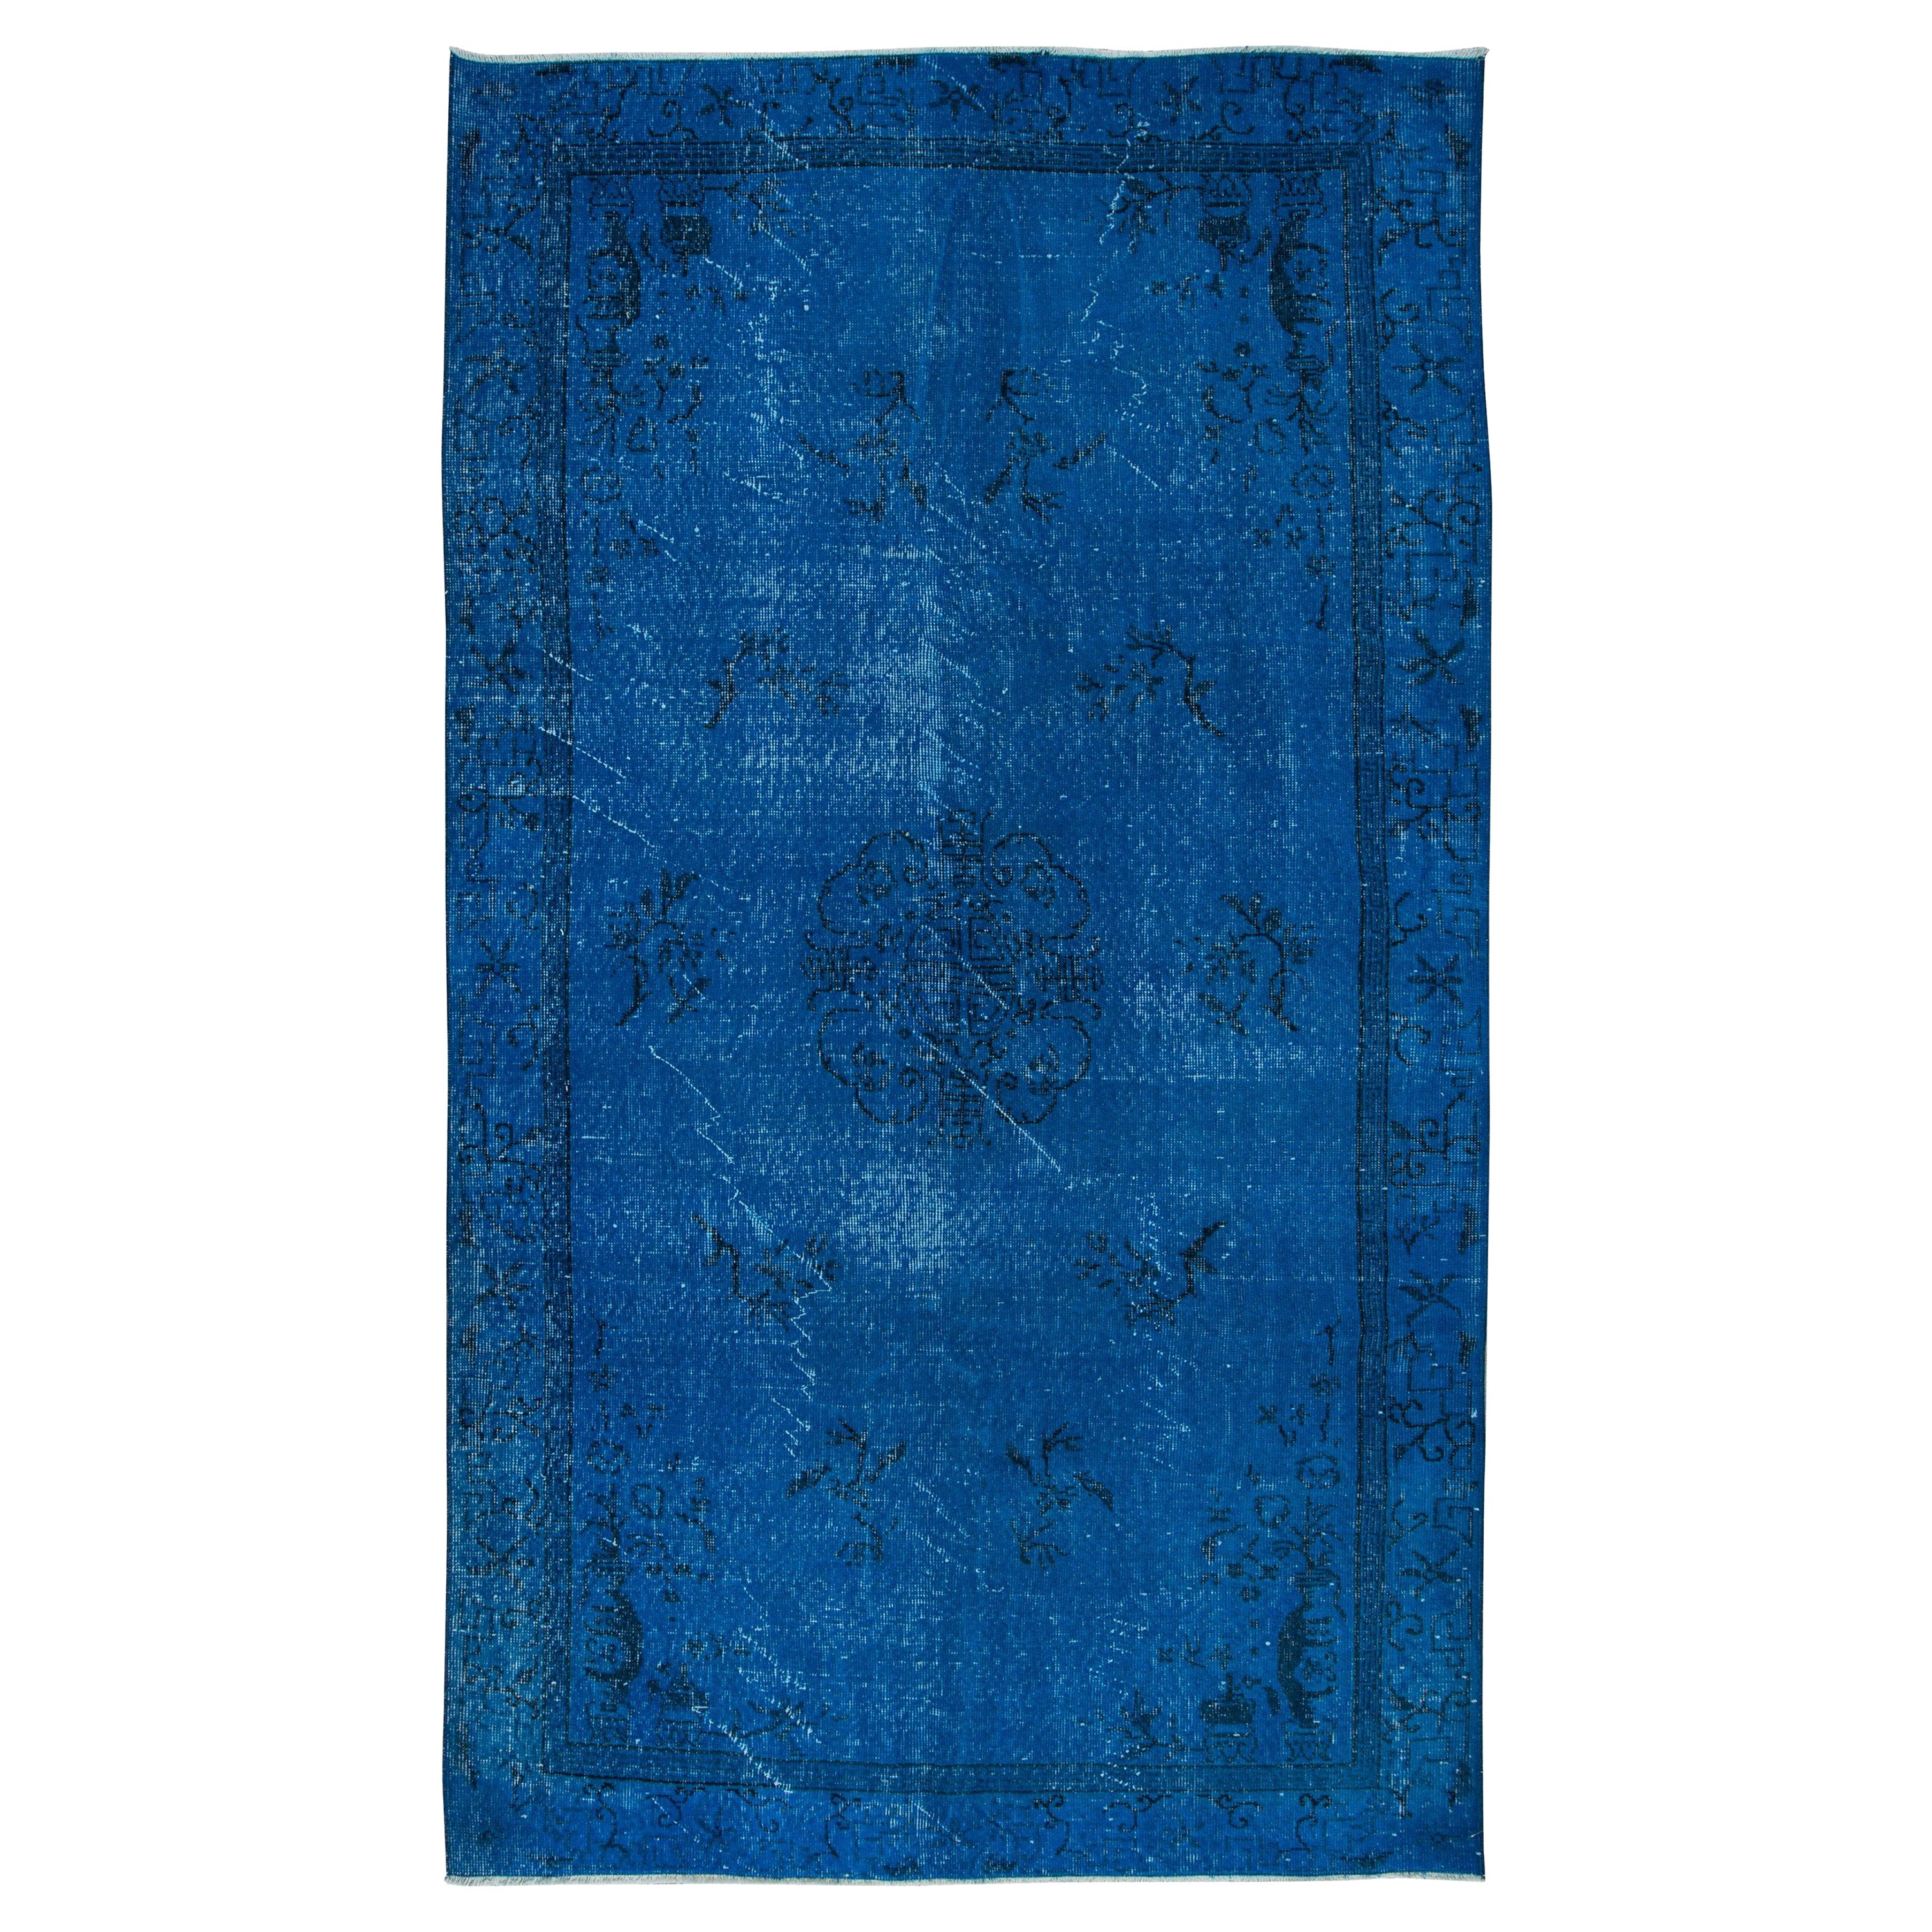 5.2x8.8 Ft Modern Blue Area Rug with Art Deco Chinese Design, Handmade in Turkey For Sale